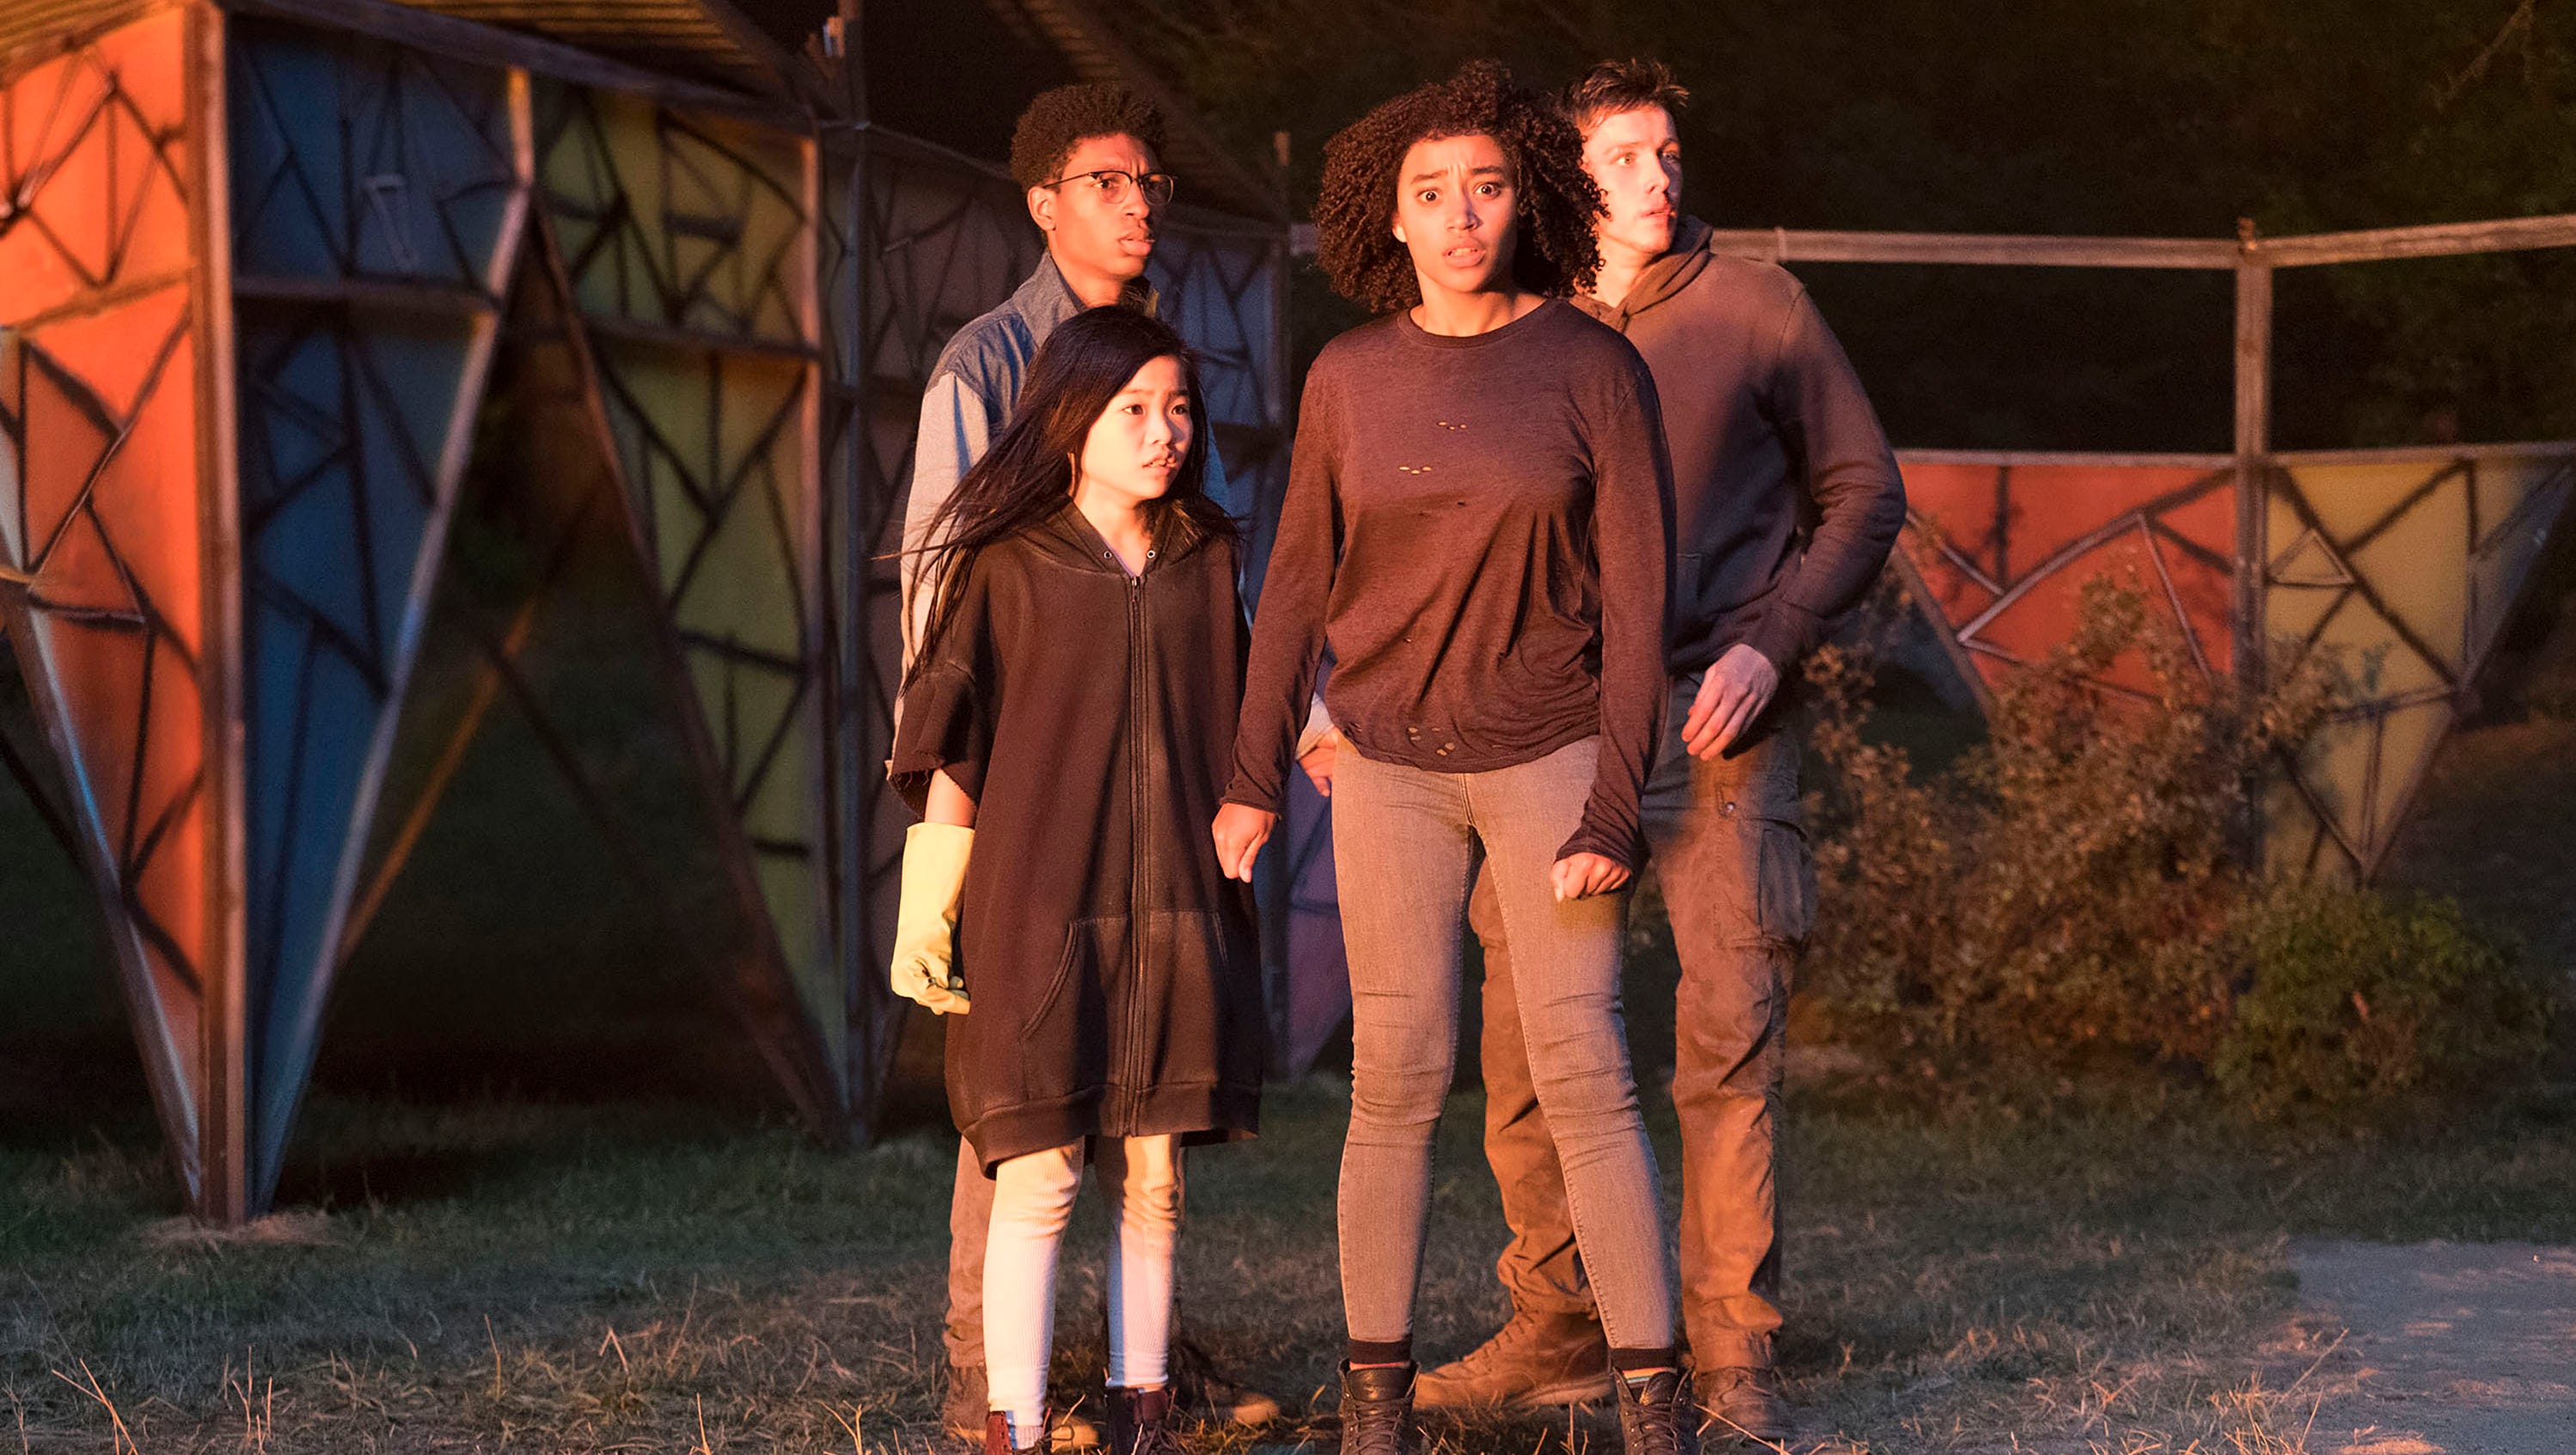 Amandla Stenberg On Darkest Minds Coming Out And Her Holocaust Film